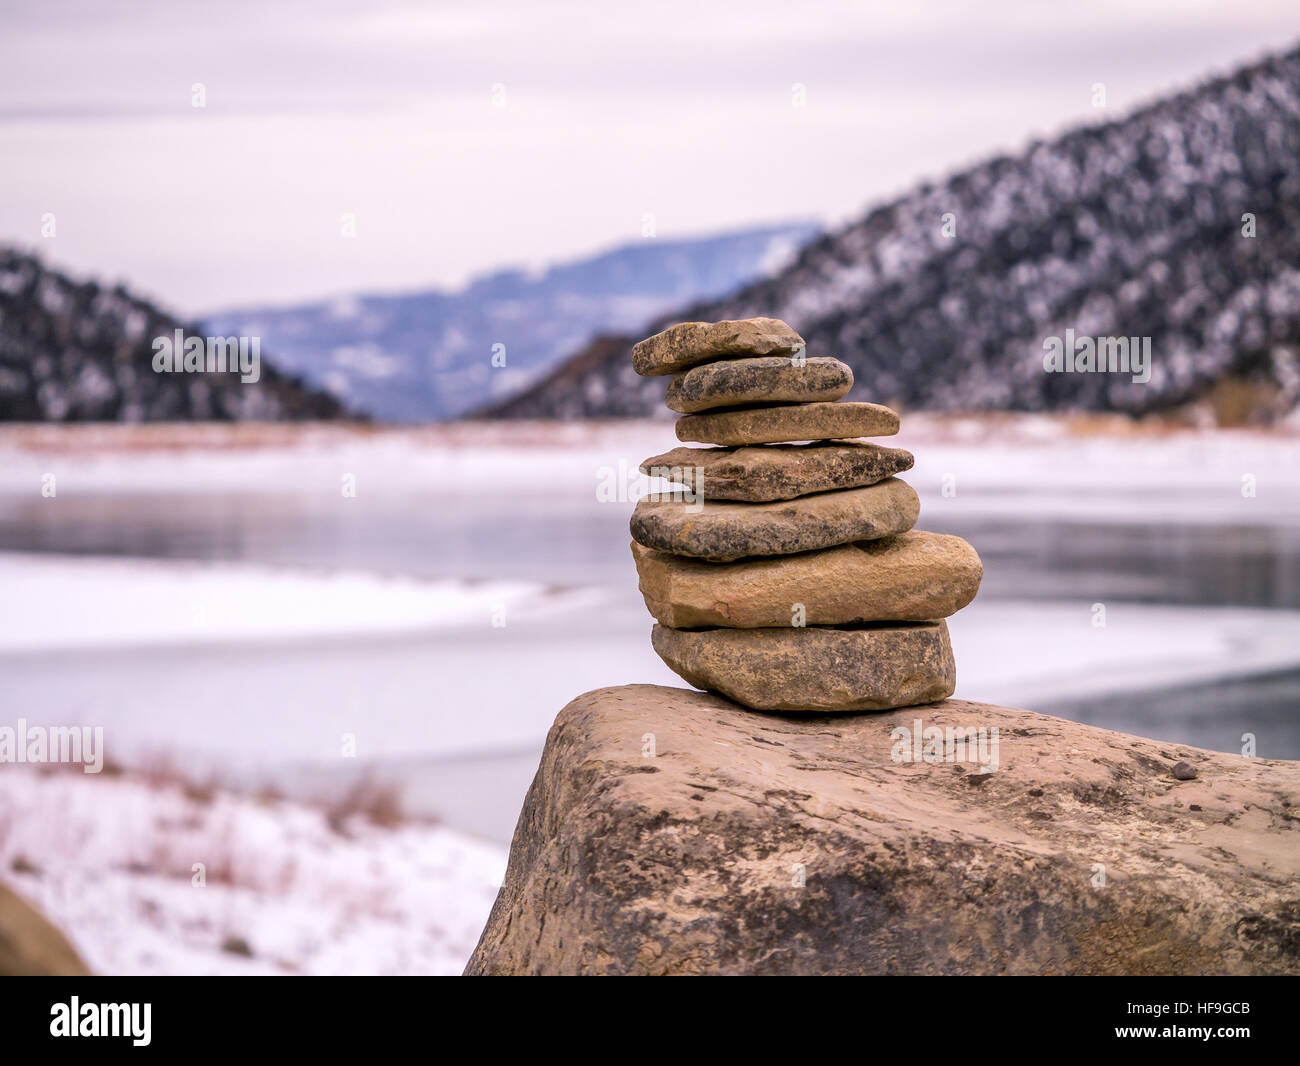 Rock Cairn With Frozen Lake In Background Stock Photo 129902875